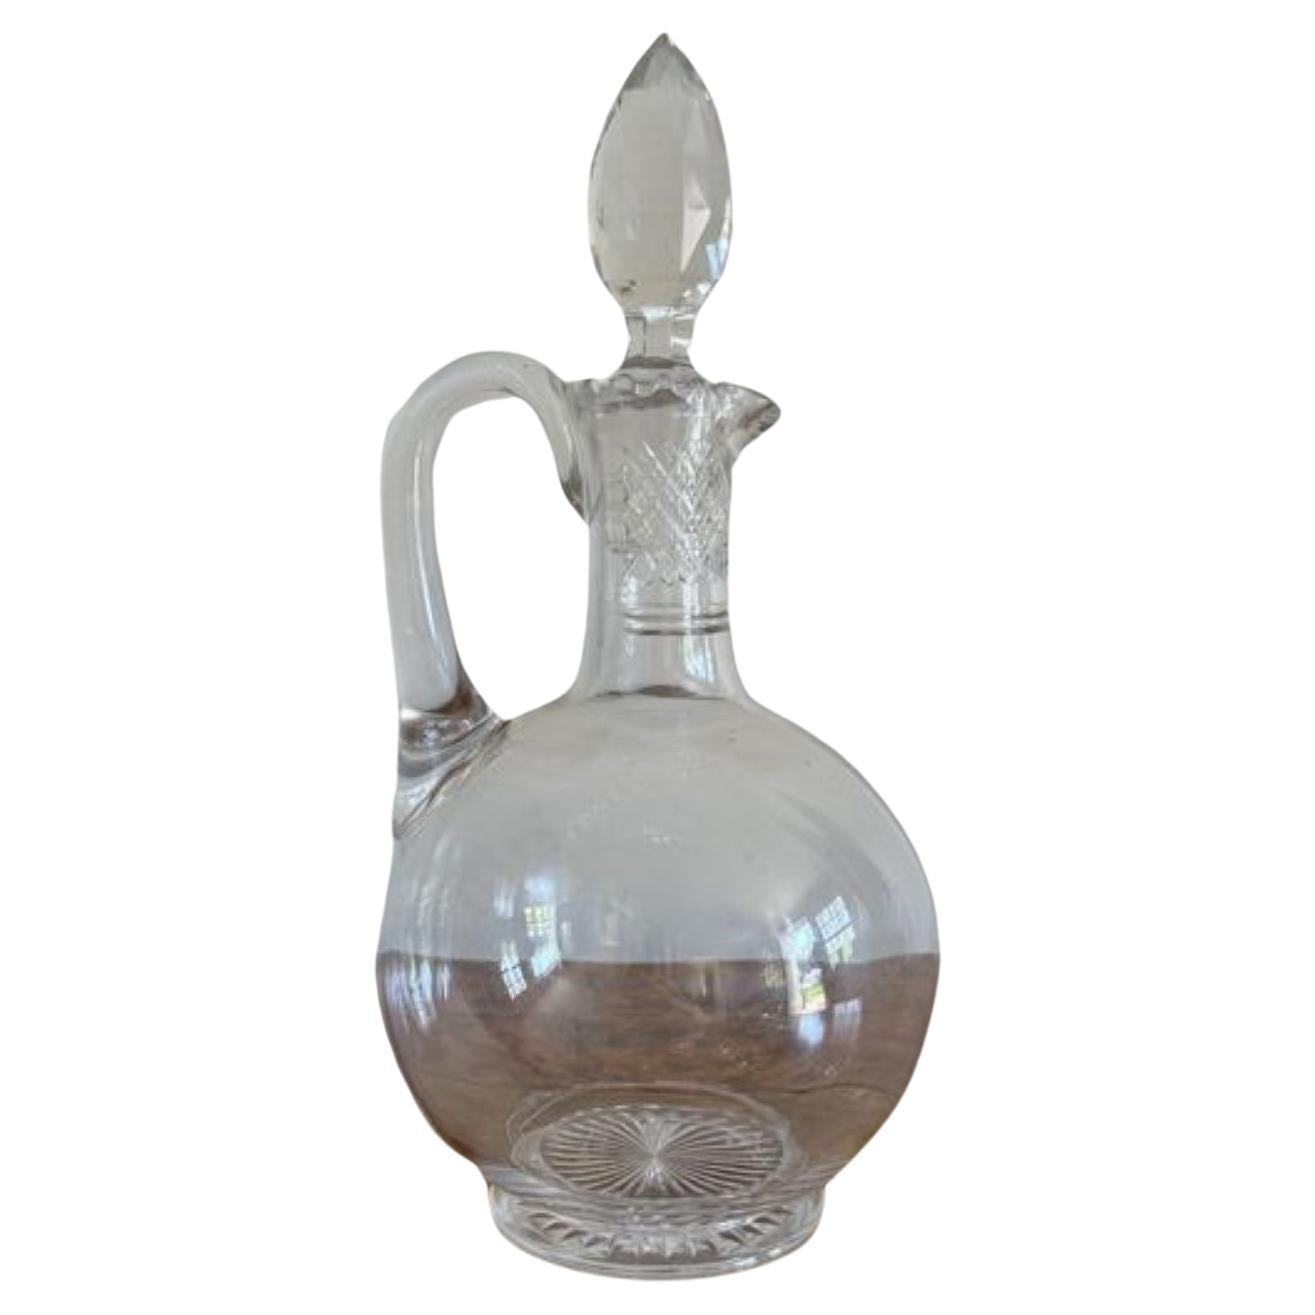 Quality antique Edwardian glass ewer  For Sale